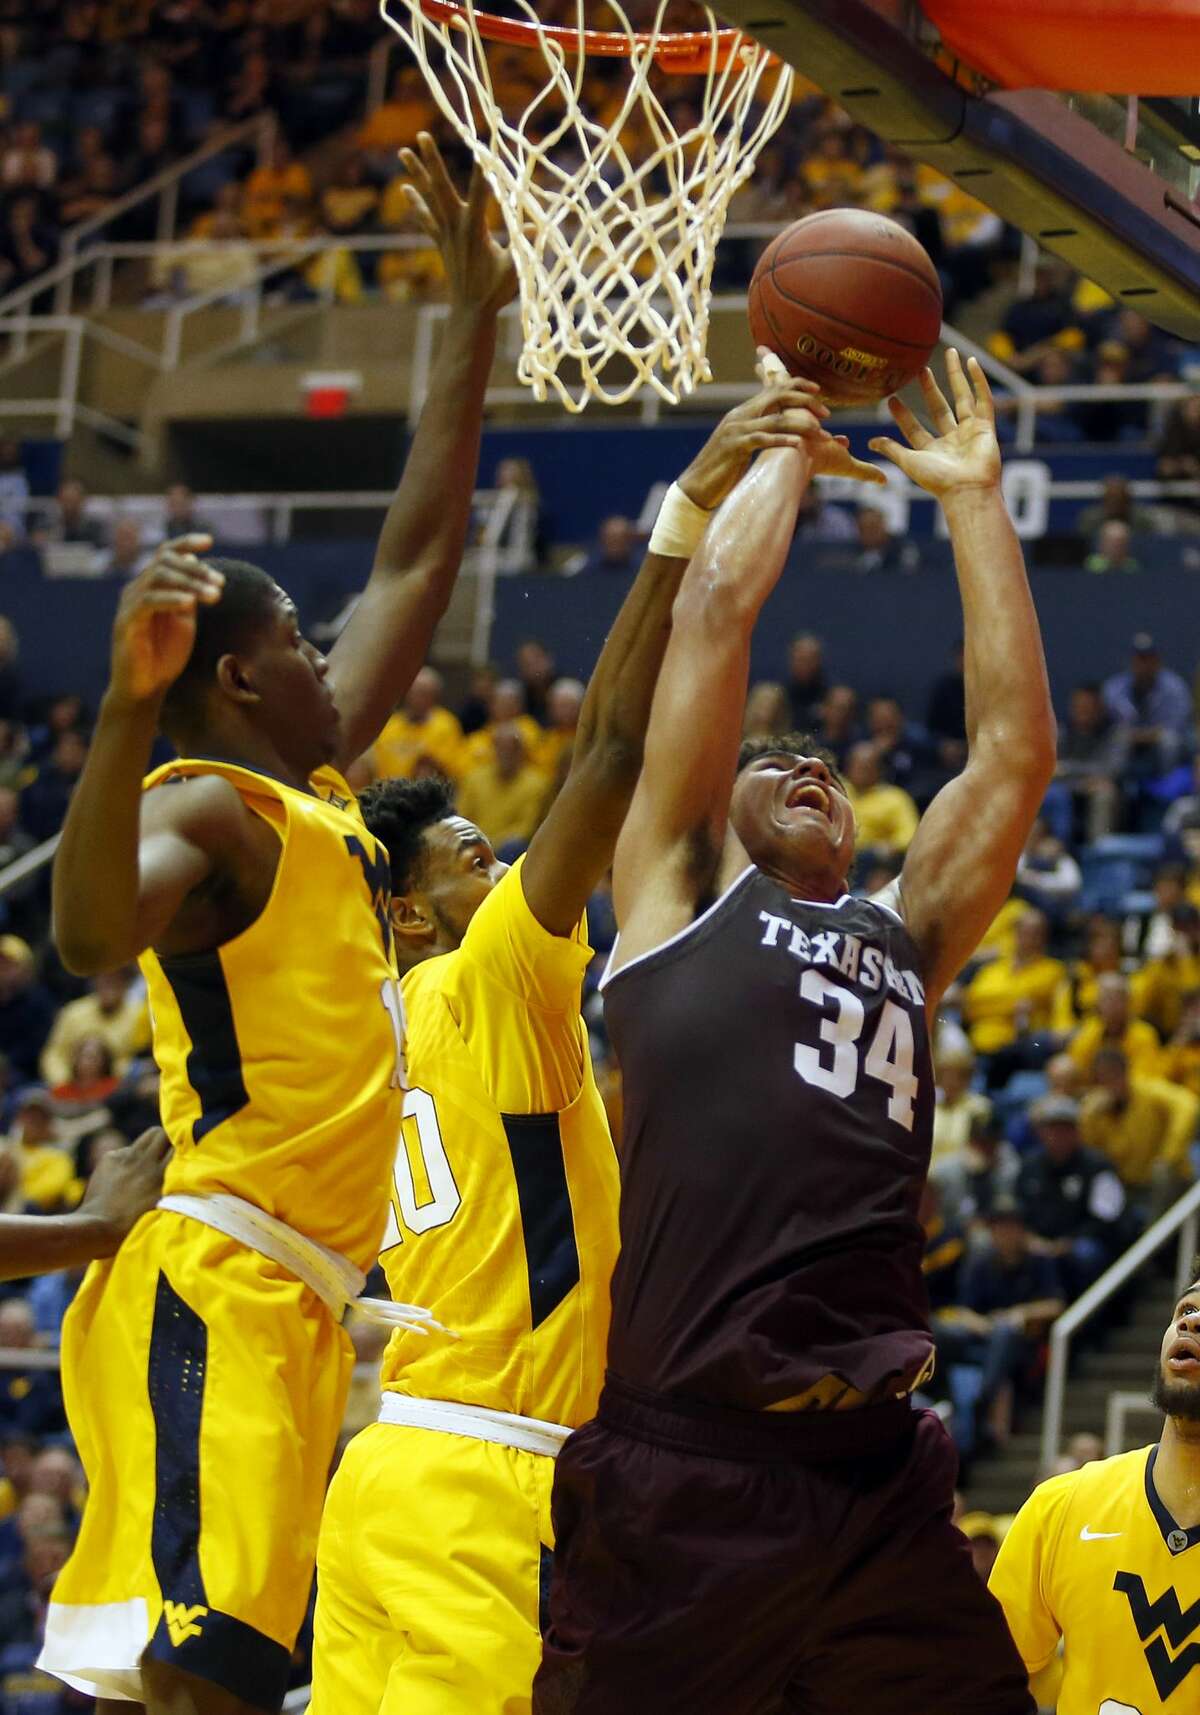 MORGANTOWN, WV - JANUARY 28: Tyler Davis #34 of the Texas A&M Aggies is fouled against the West Virginia Mountaineers at the WVU Coliseum on January 28, 2017 in Morgantown, West Virginia. (Photo by Justin K. Aller/Getty Images)